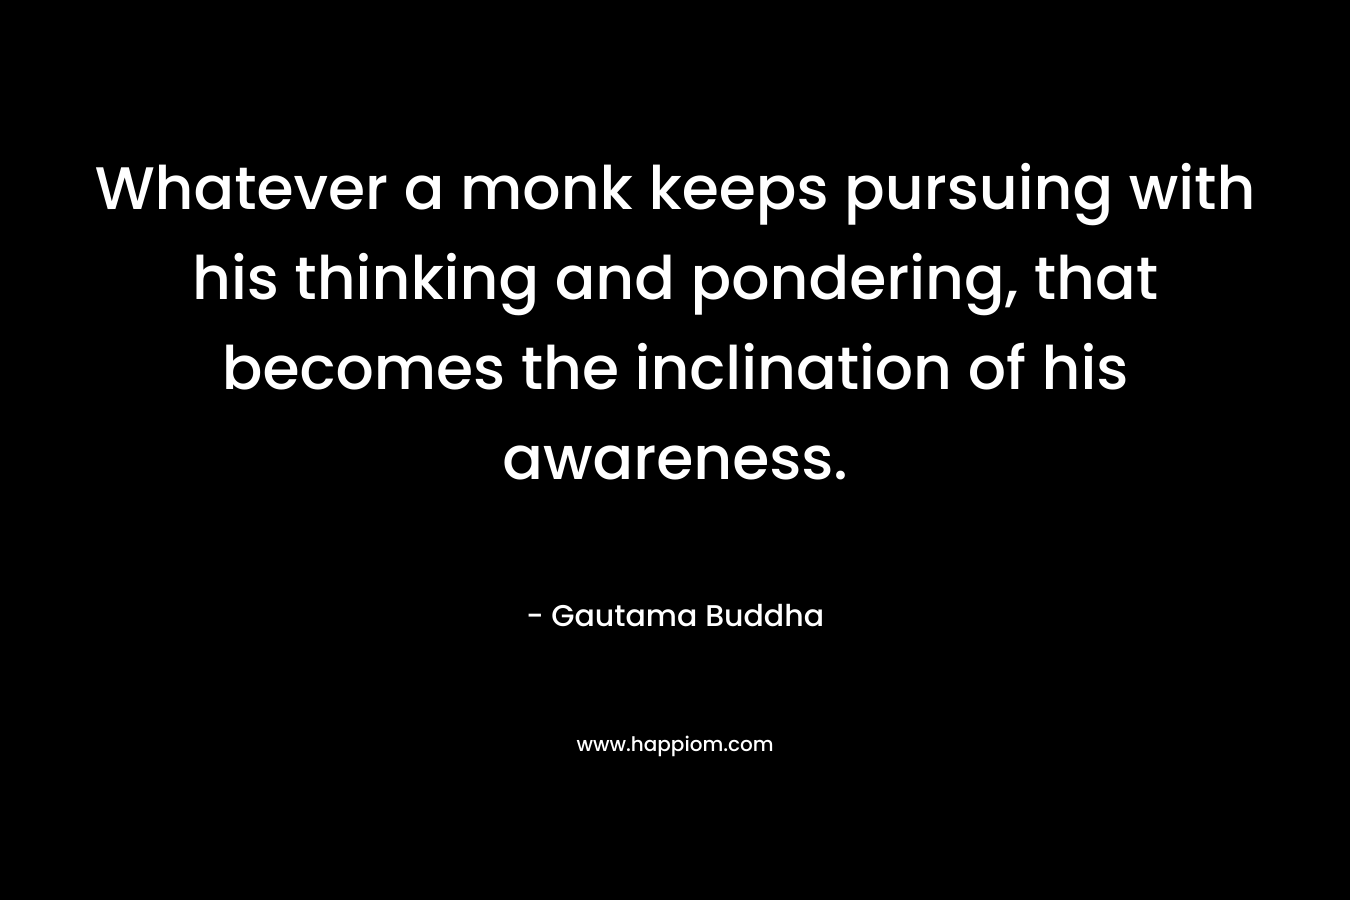 Whatever a monk keeps pursuing with his thinking and pondering, that becomes the inclination of his awareness. – Gautama Buddha